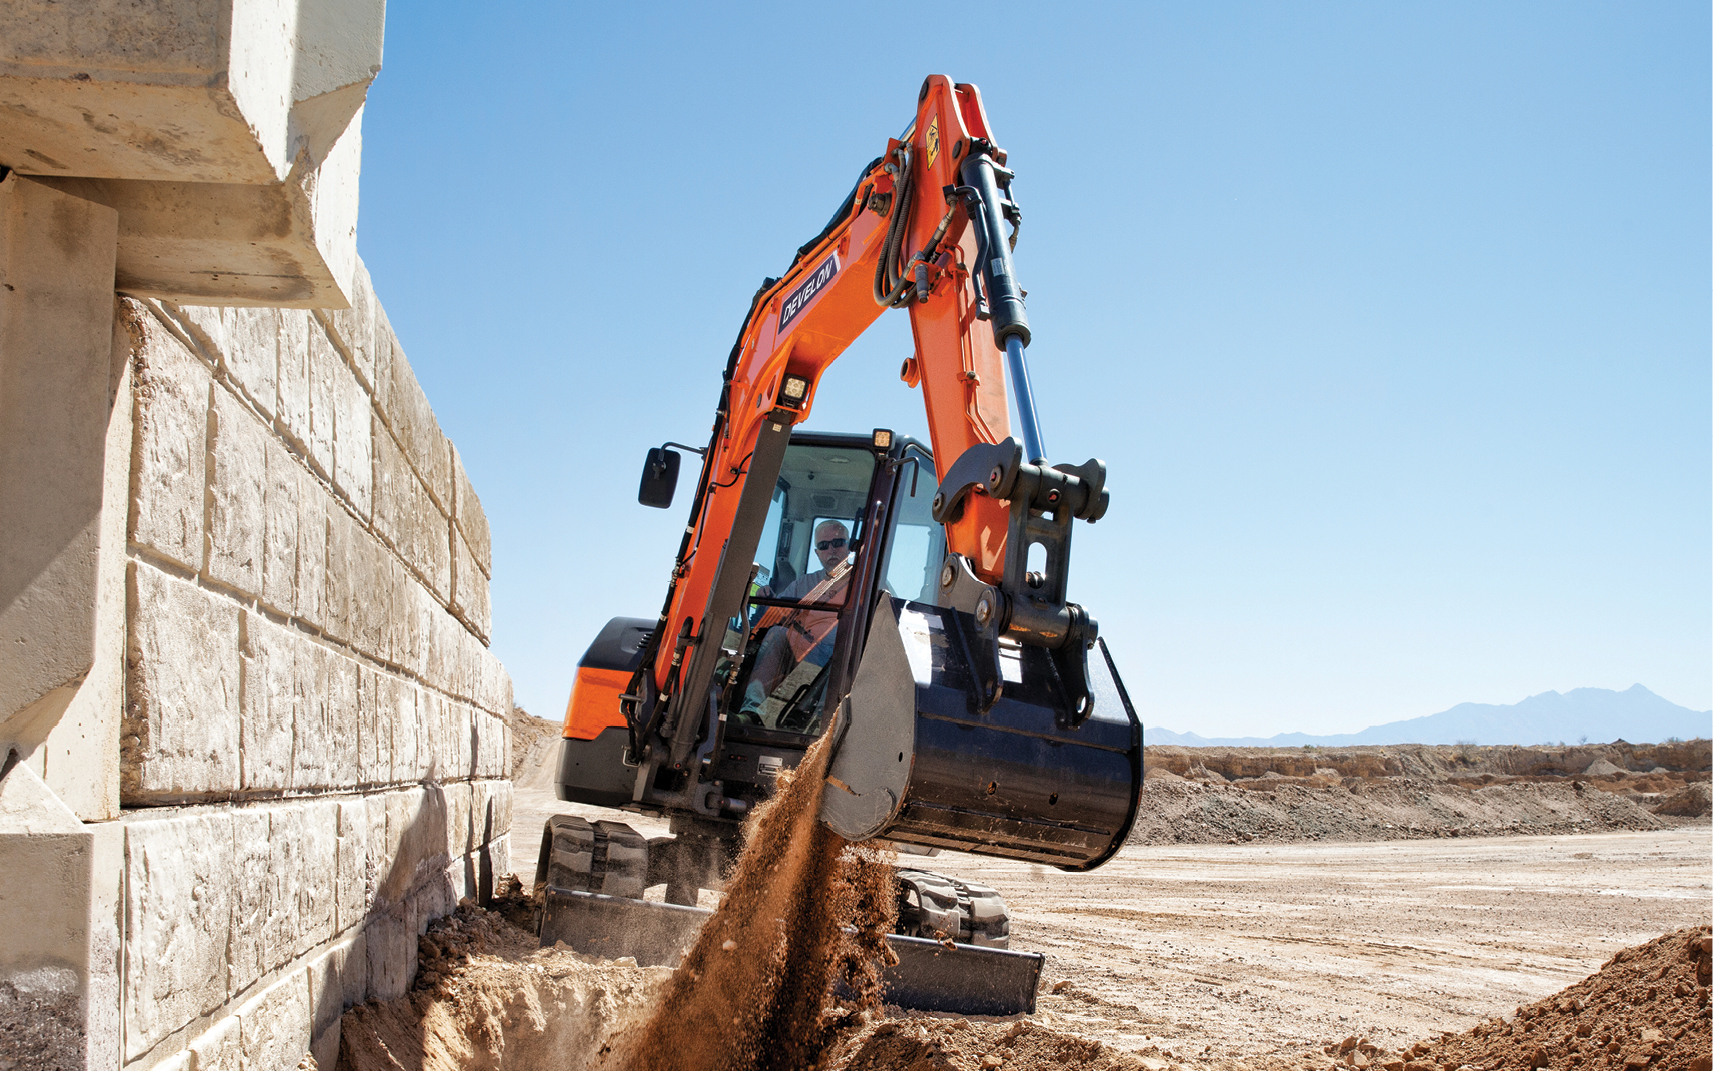 A mini excavator works next to a wall on a job site.